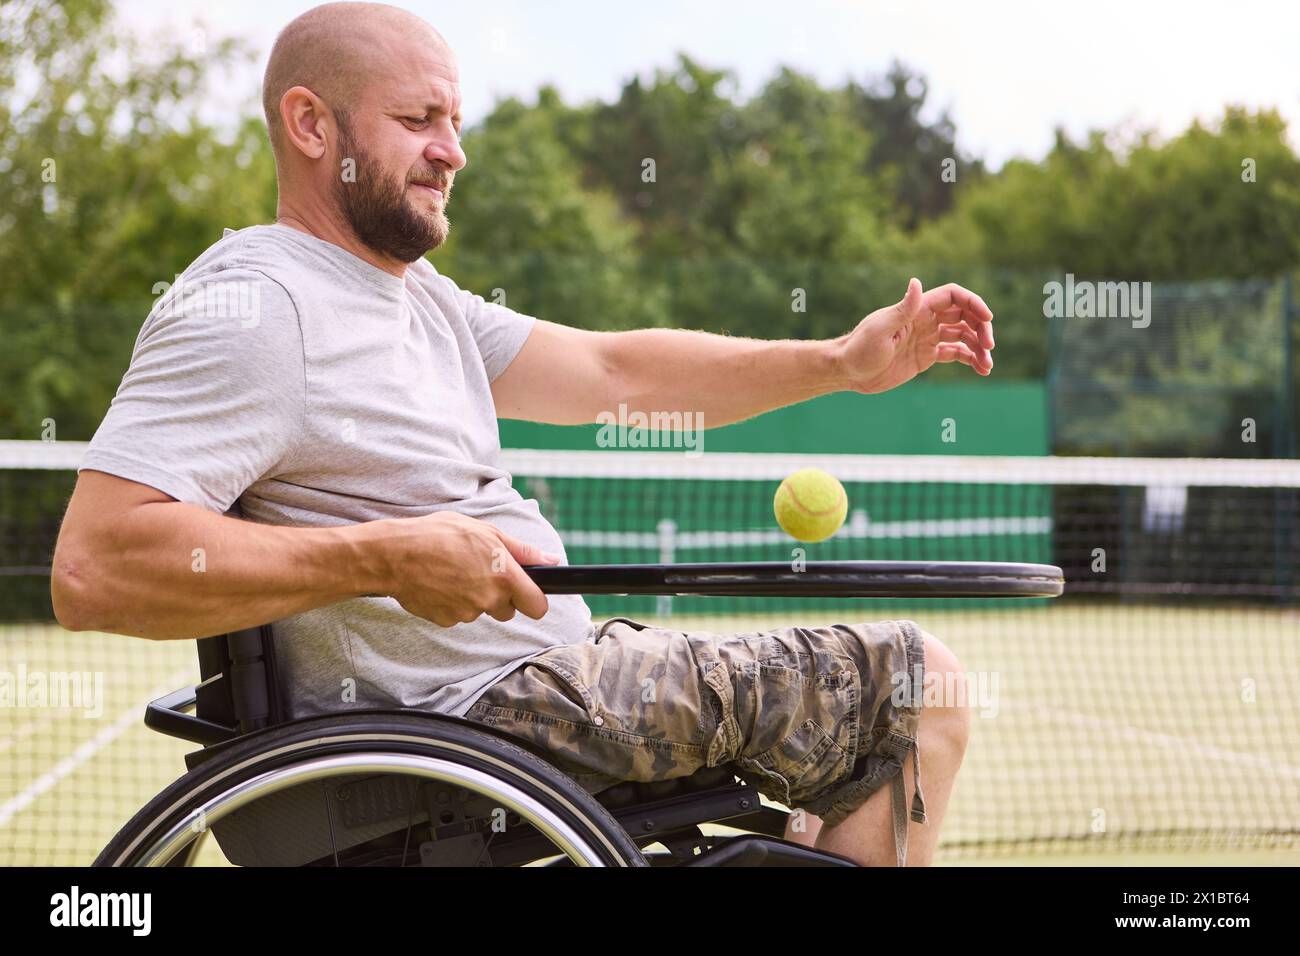 A person with a disability playing tennis on an outdoor court, exemplifying determination and enjoyment in adaptive sports. Stock Photo